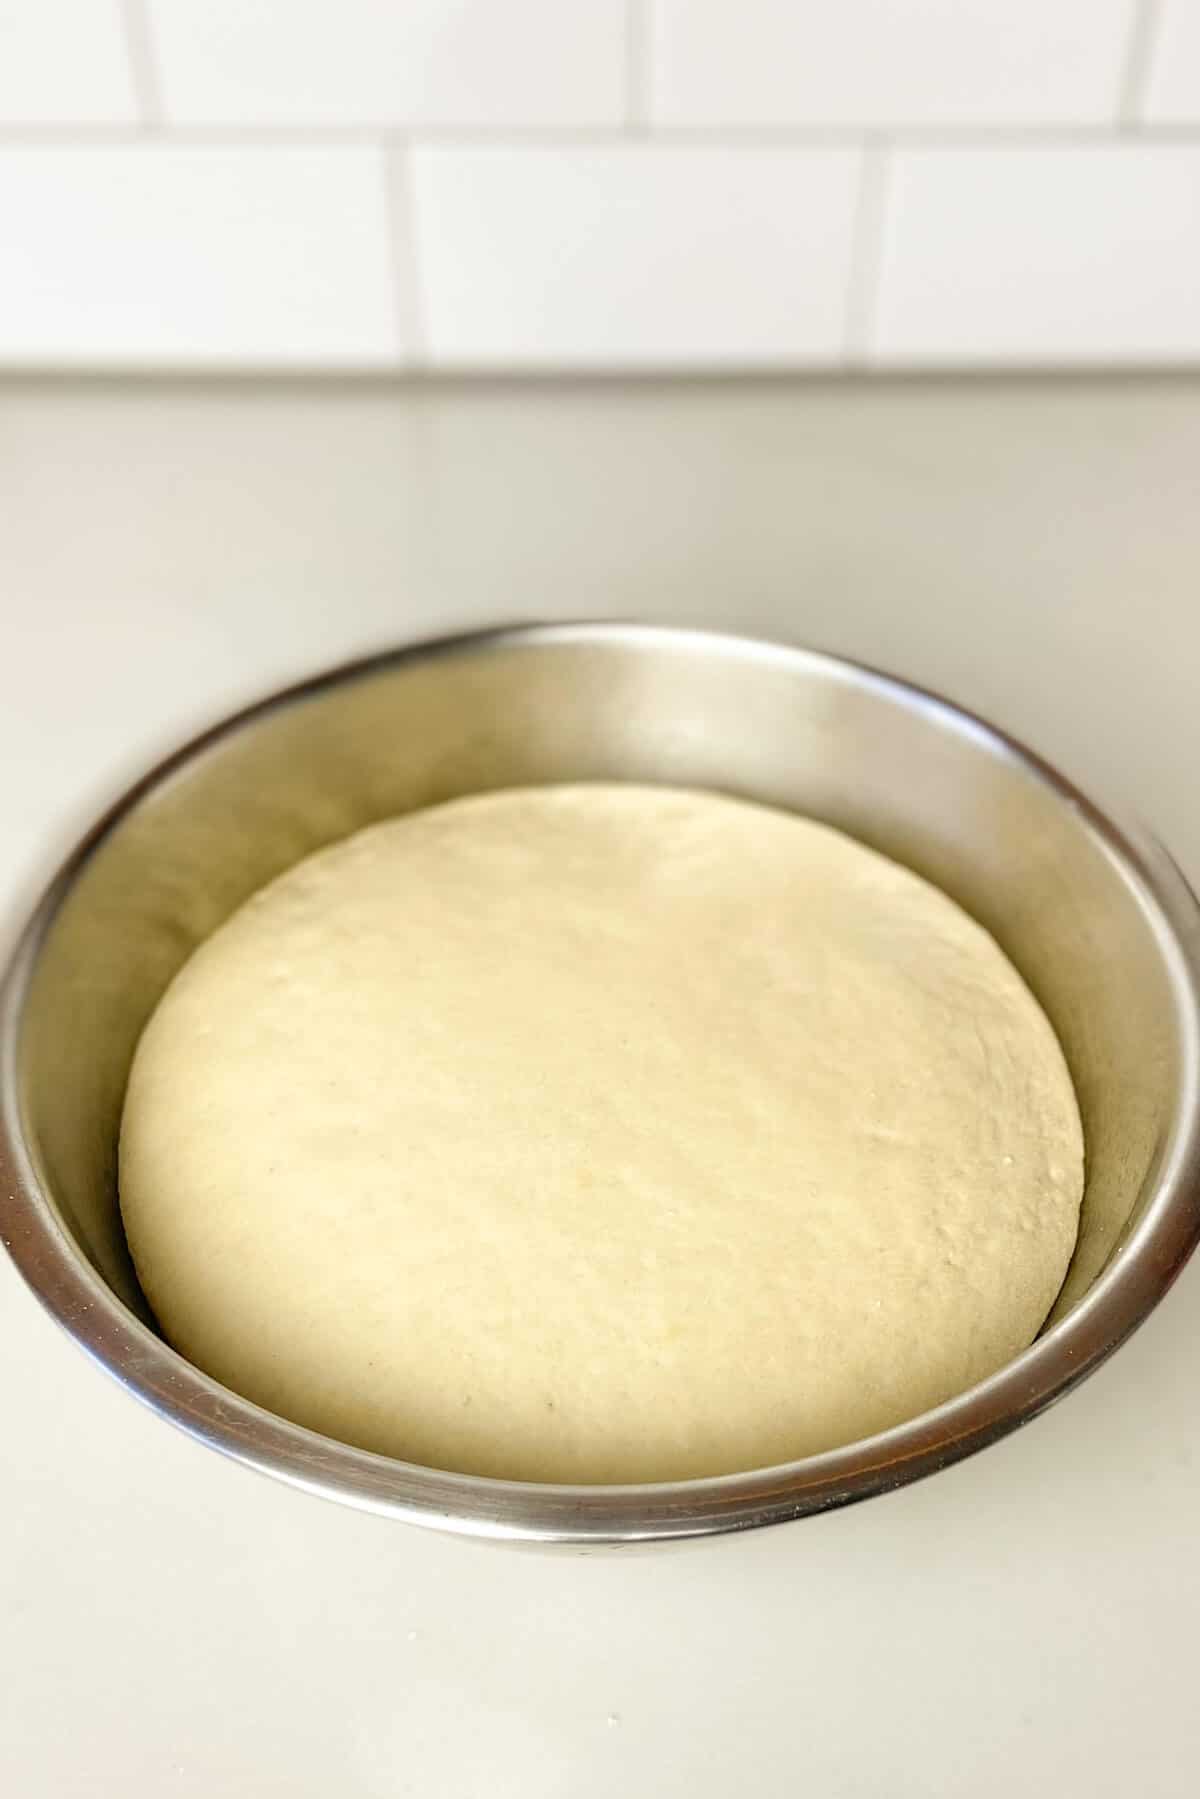 Dough in stainless steel bowl has doubled in size.